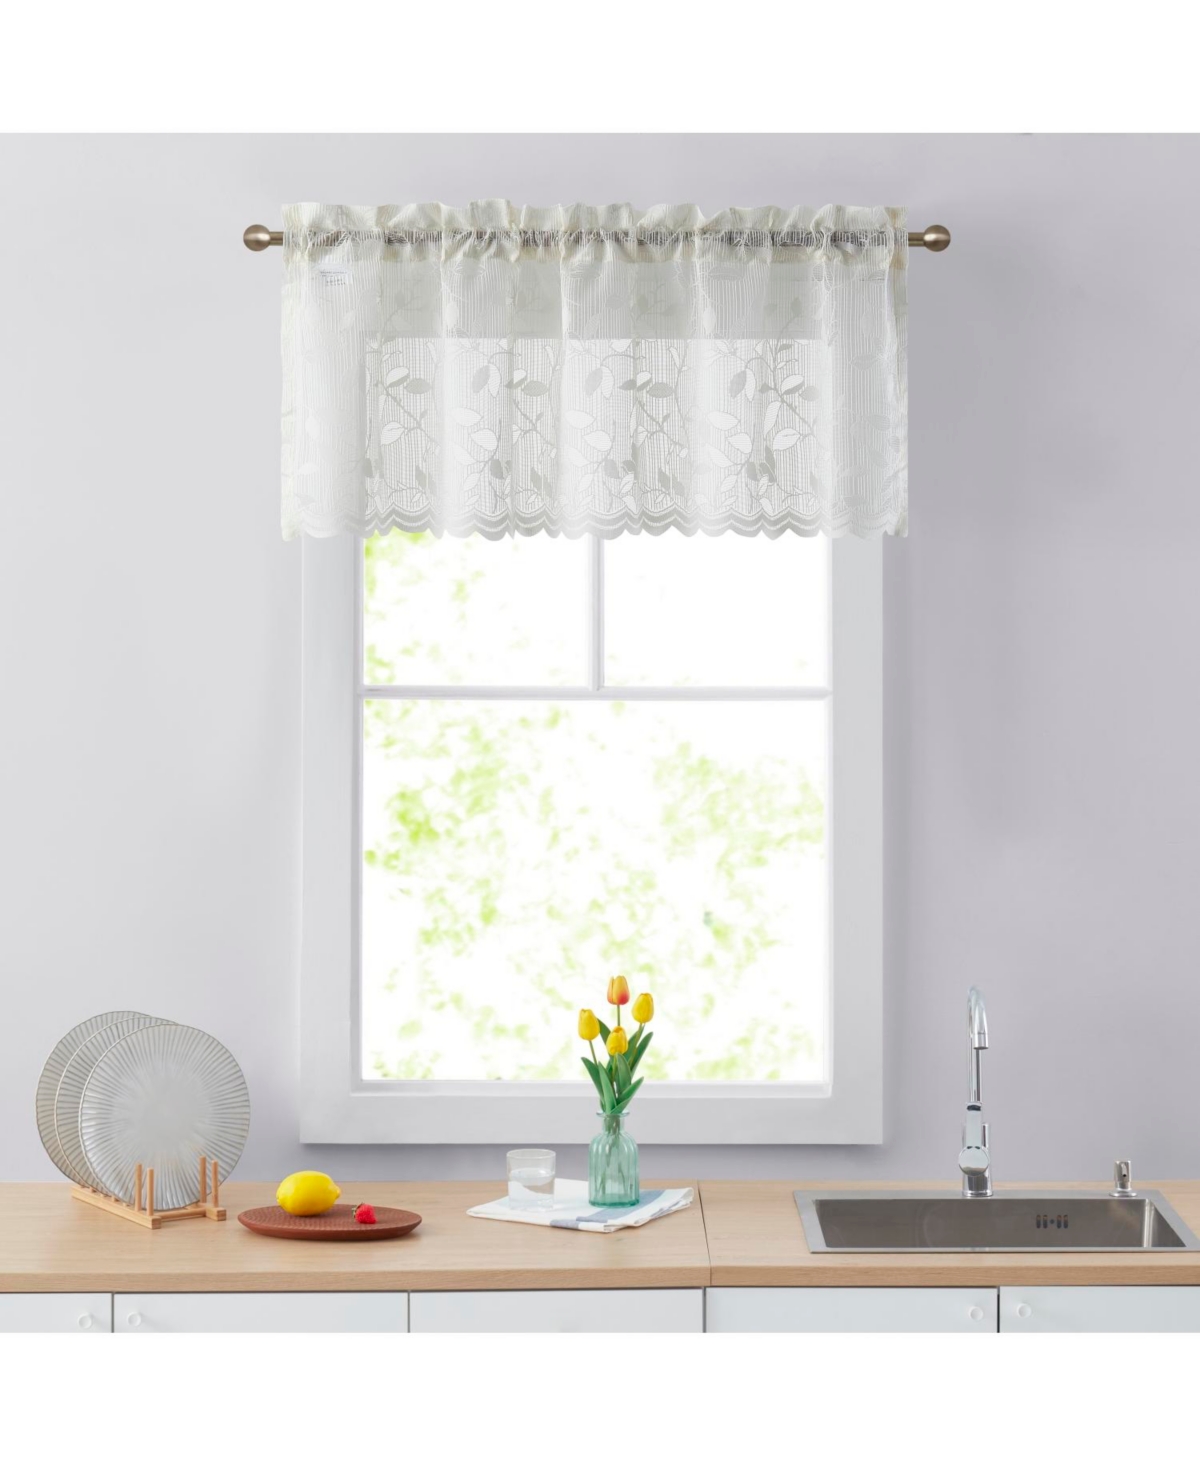 Joyce Lace Sheer Kitchen Curtain Valance Topper - Rod Pocket for Small Windows, Bathroom & Kitchen - 54 W x 18 L - Linen taupe